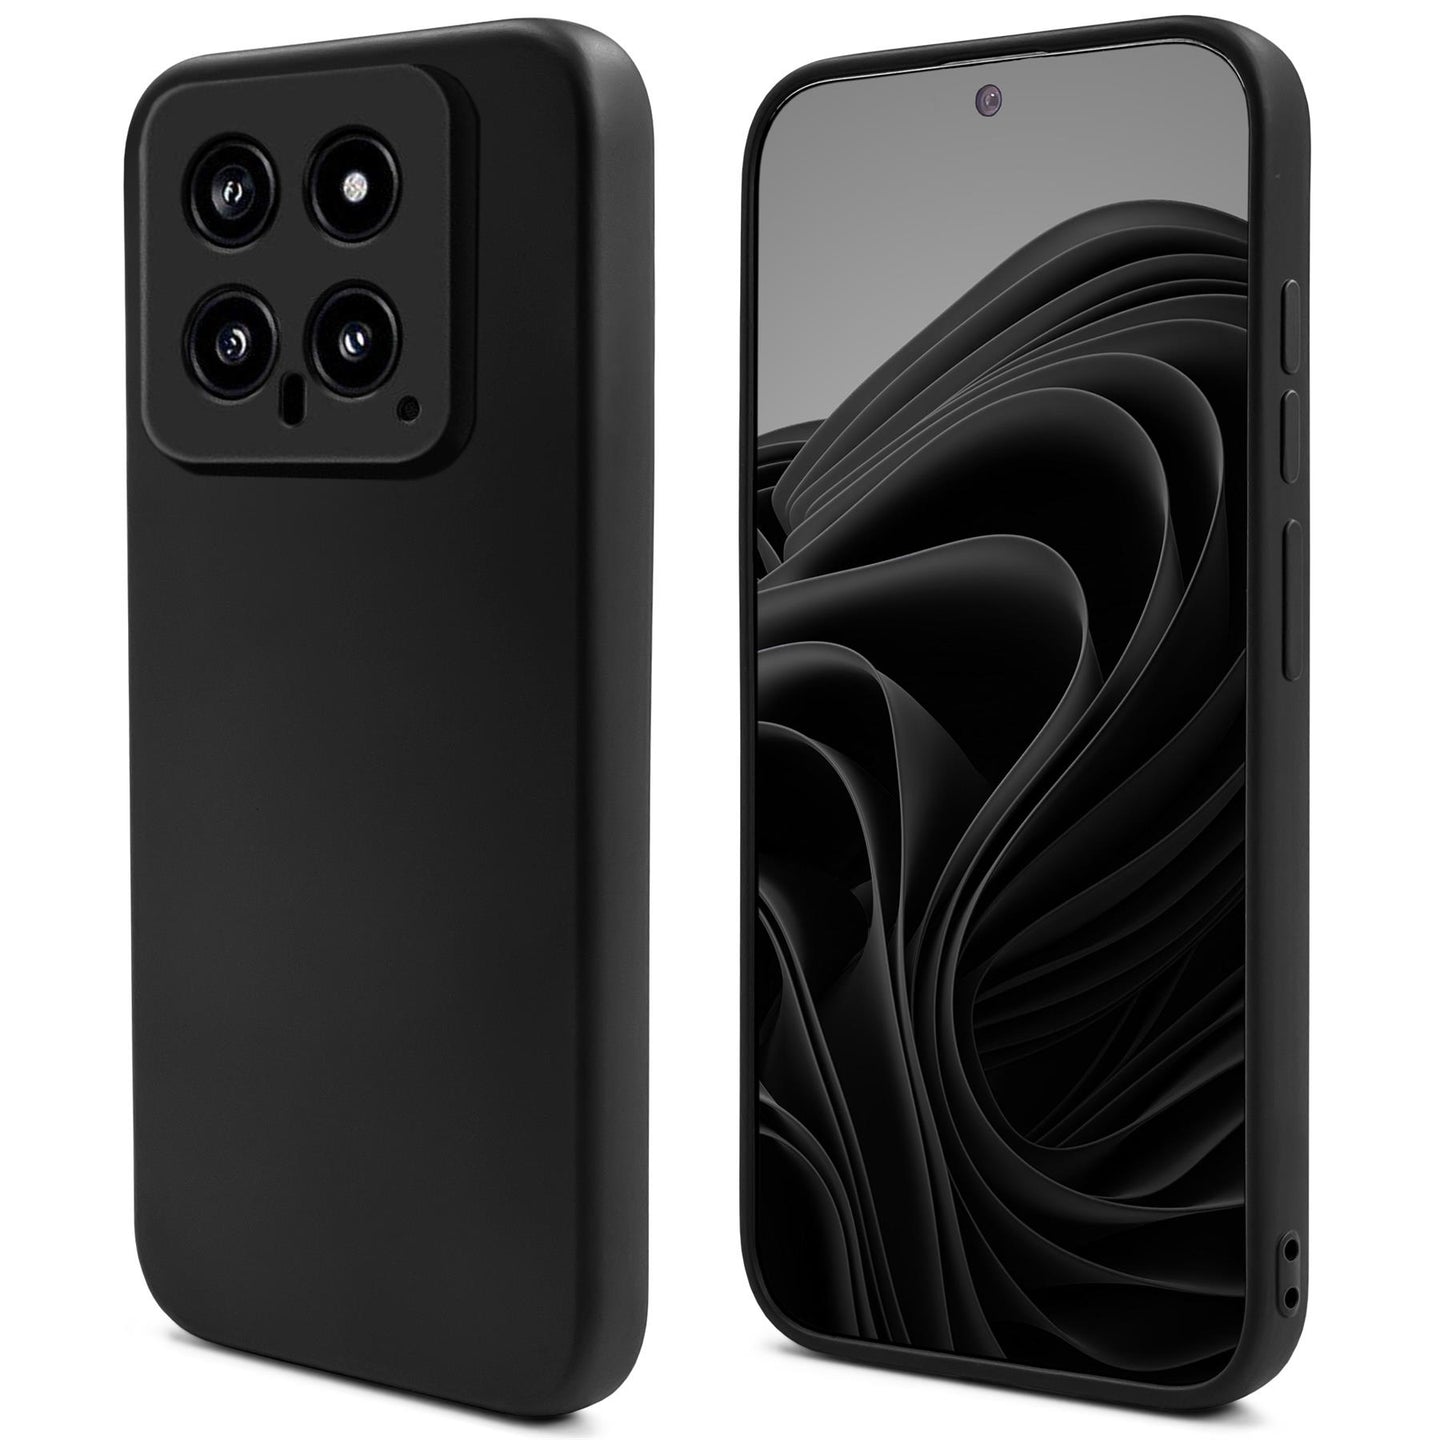 Moozy Lifestyle. Silicone Case for Xiaomi 14, Black - Liquid Silicone Lightweight Cover with Matte Finish and Soft Microfiber Lining, Premium Silicone Case